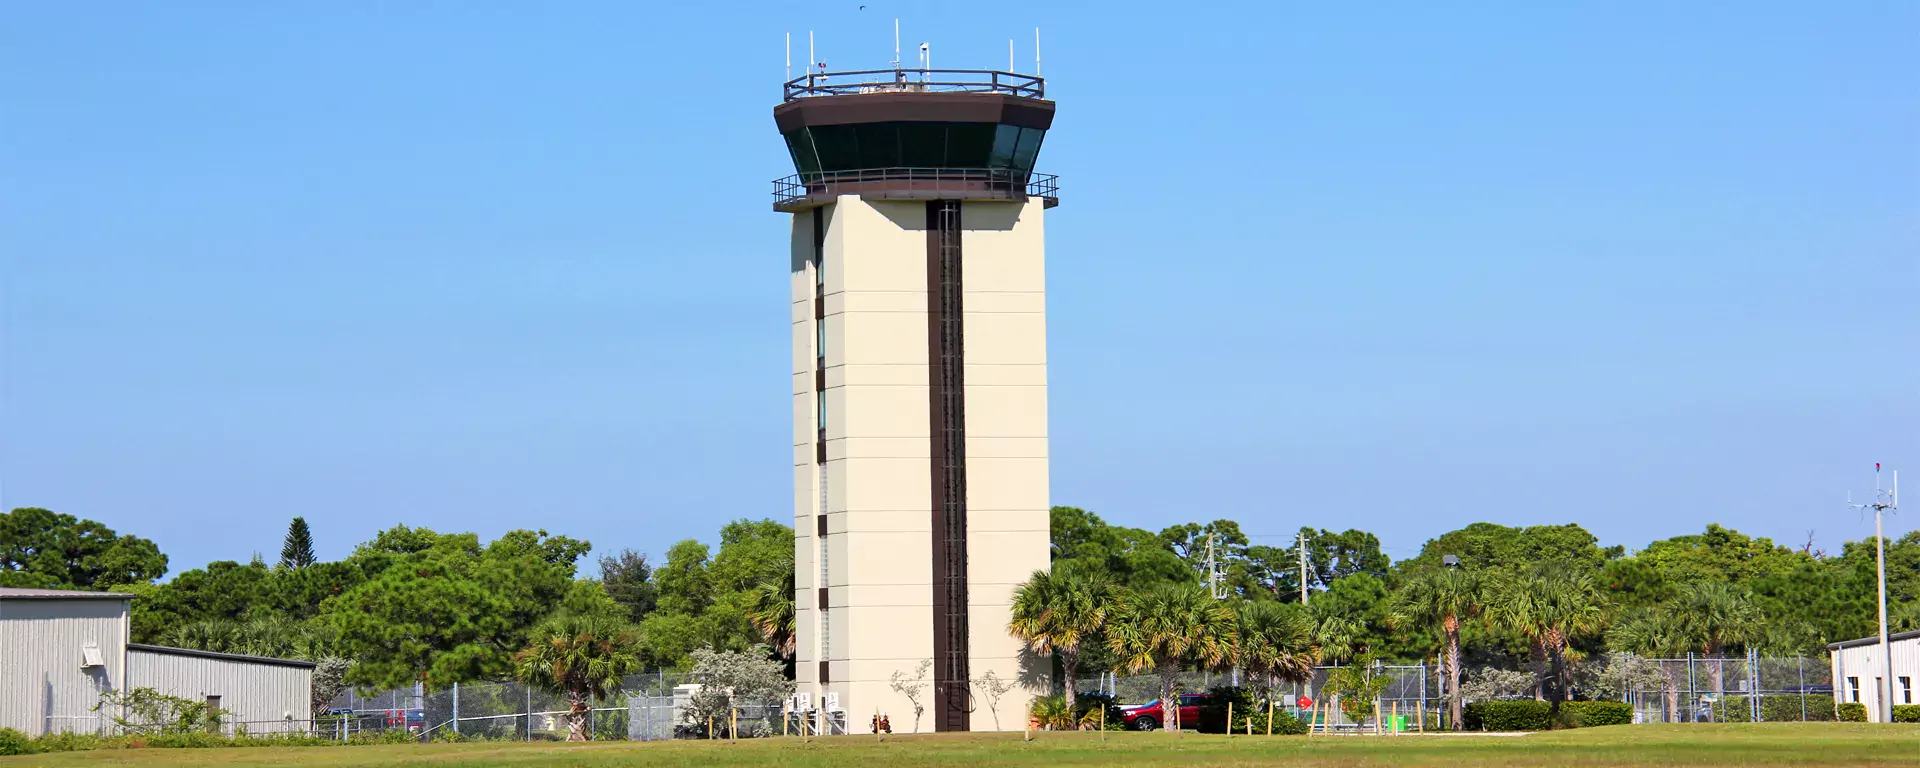 Airport tower at Witham Field